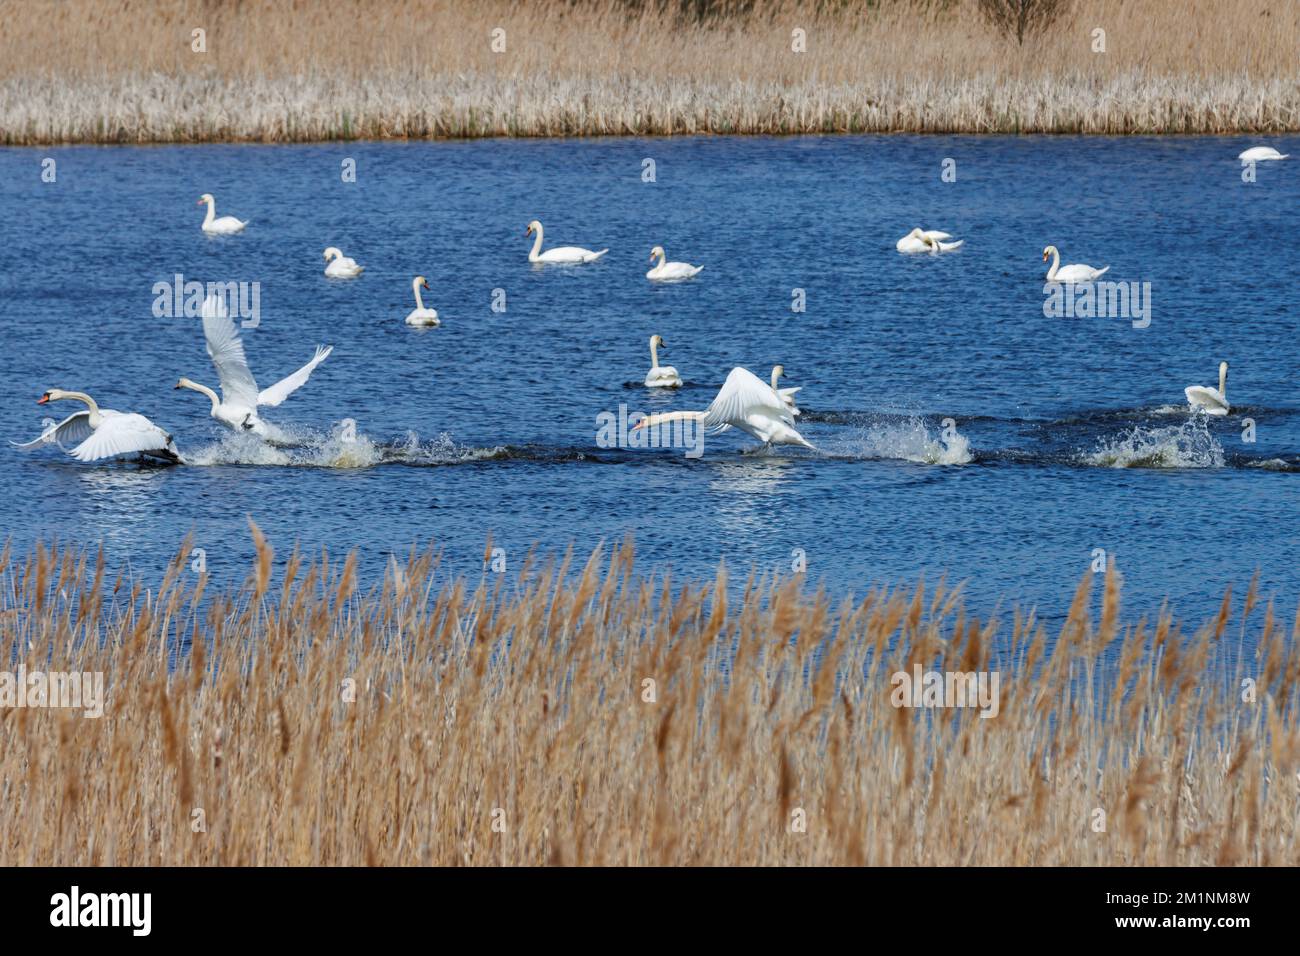 Swans in a small lake in Motala Sweden. Some chasing each other and some swans are resting or hiding Stock Photo